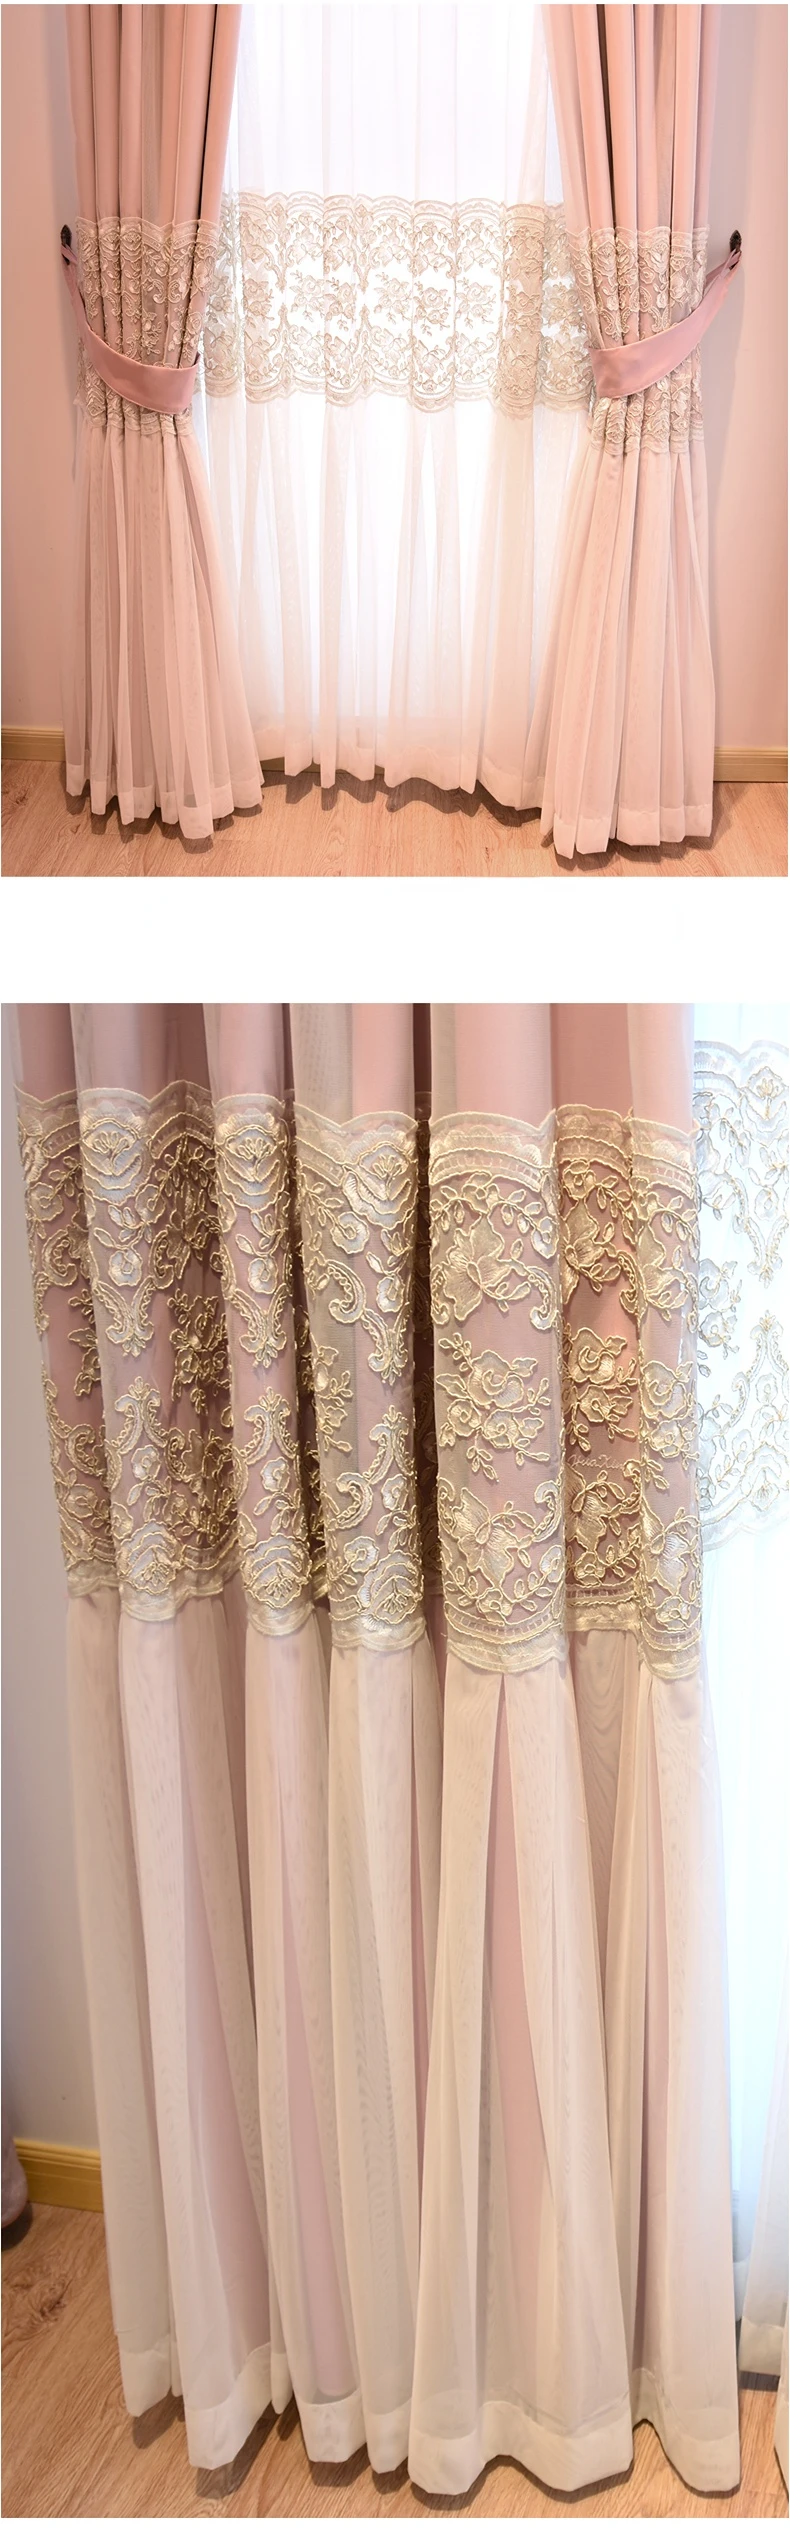 New Pink Girl's Room Lace Cloth Yarn One Double-layer Embroidered Curtains for Living Room Bedroom Finished Partition Curtain